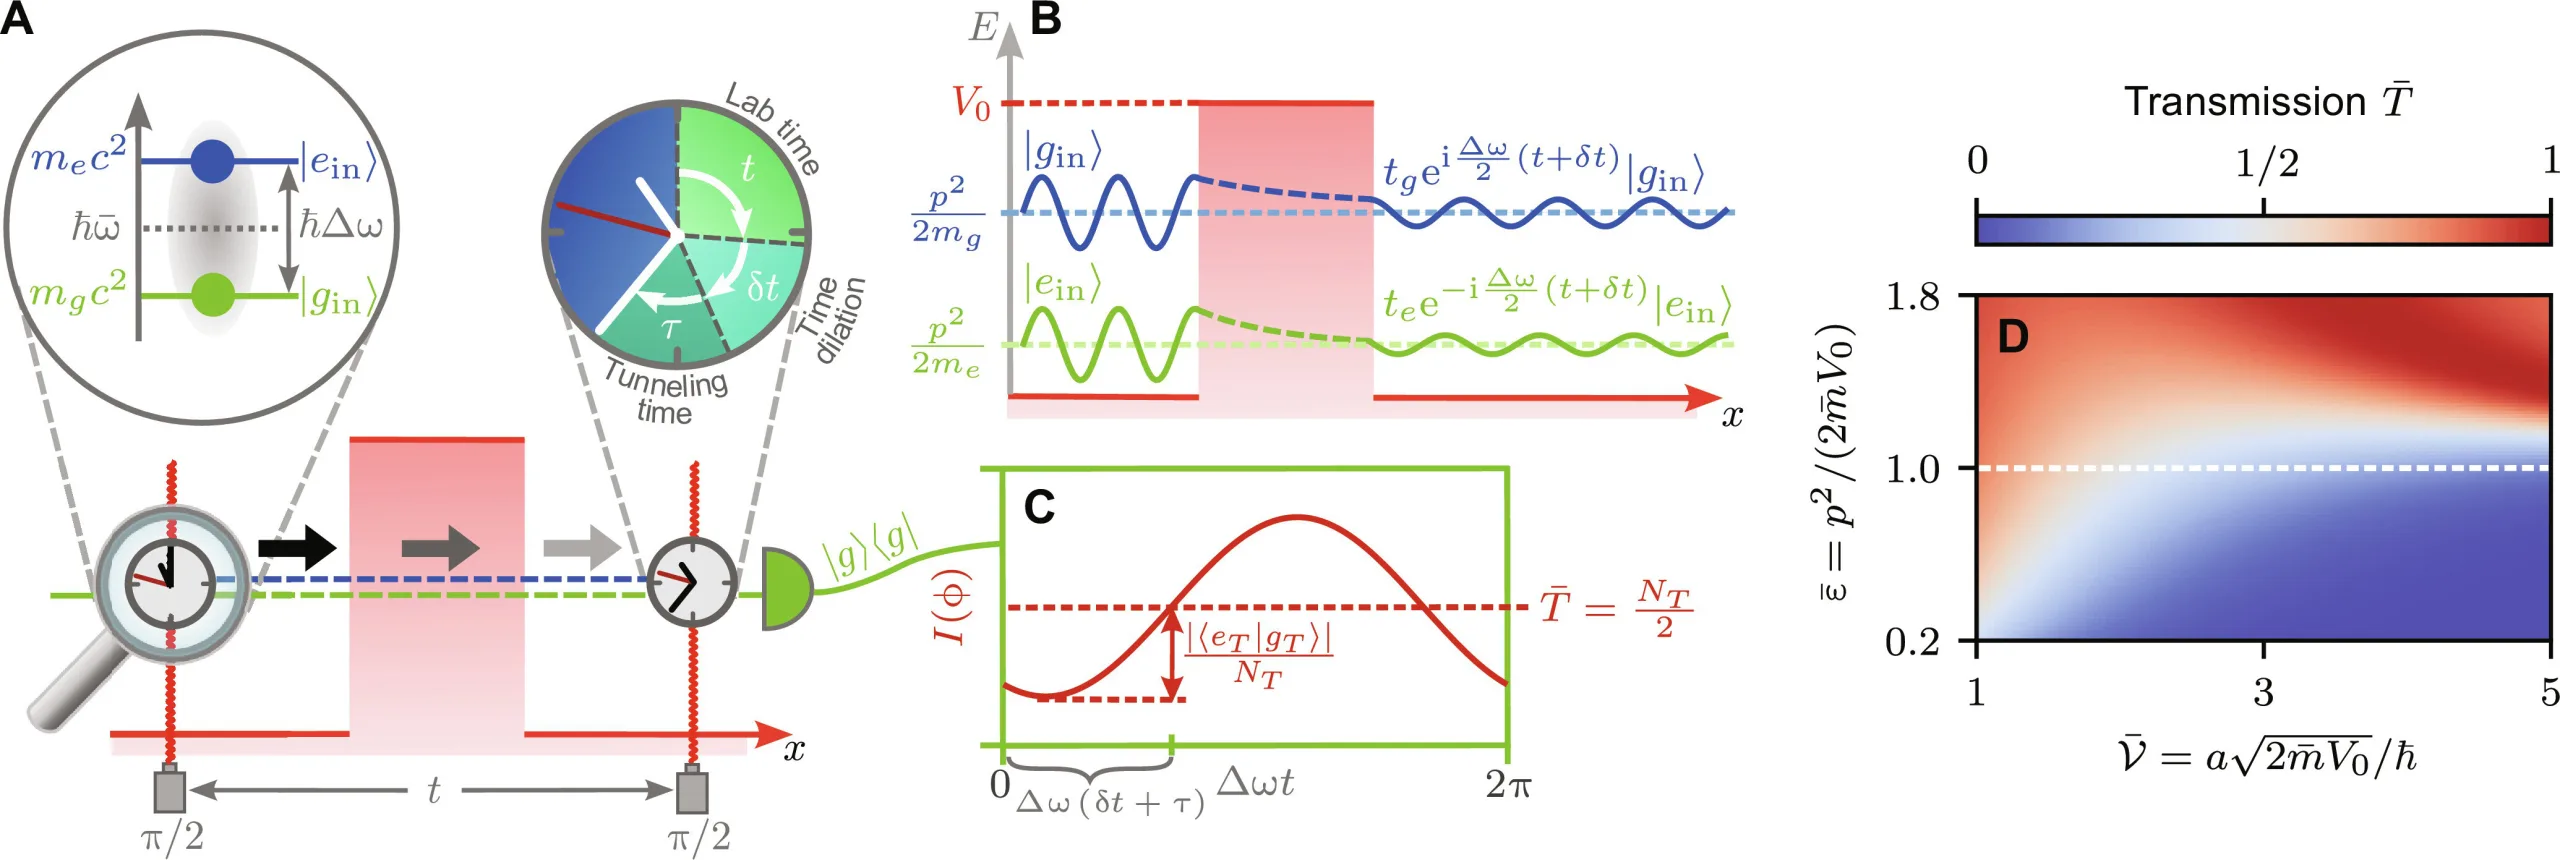 Quantum Tunneling Times Measured By Ramsey Clocks: A Leap In Quantum Physics